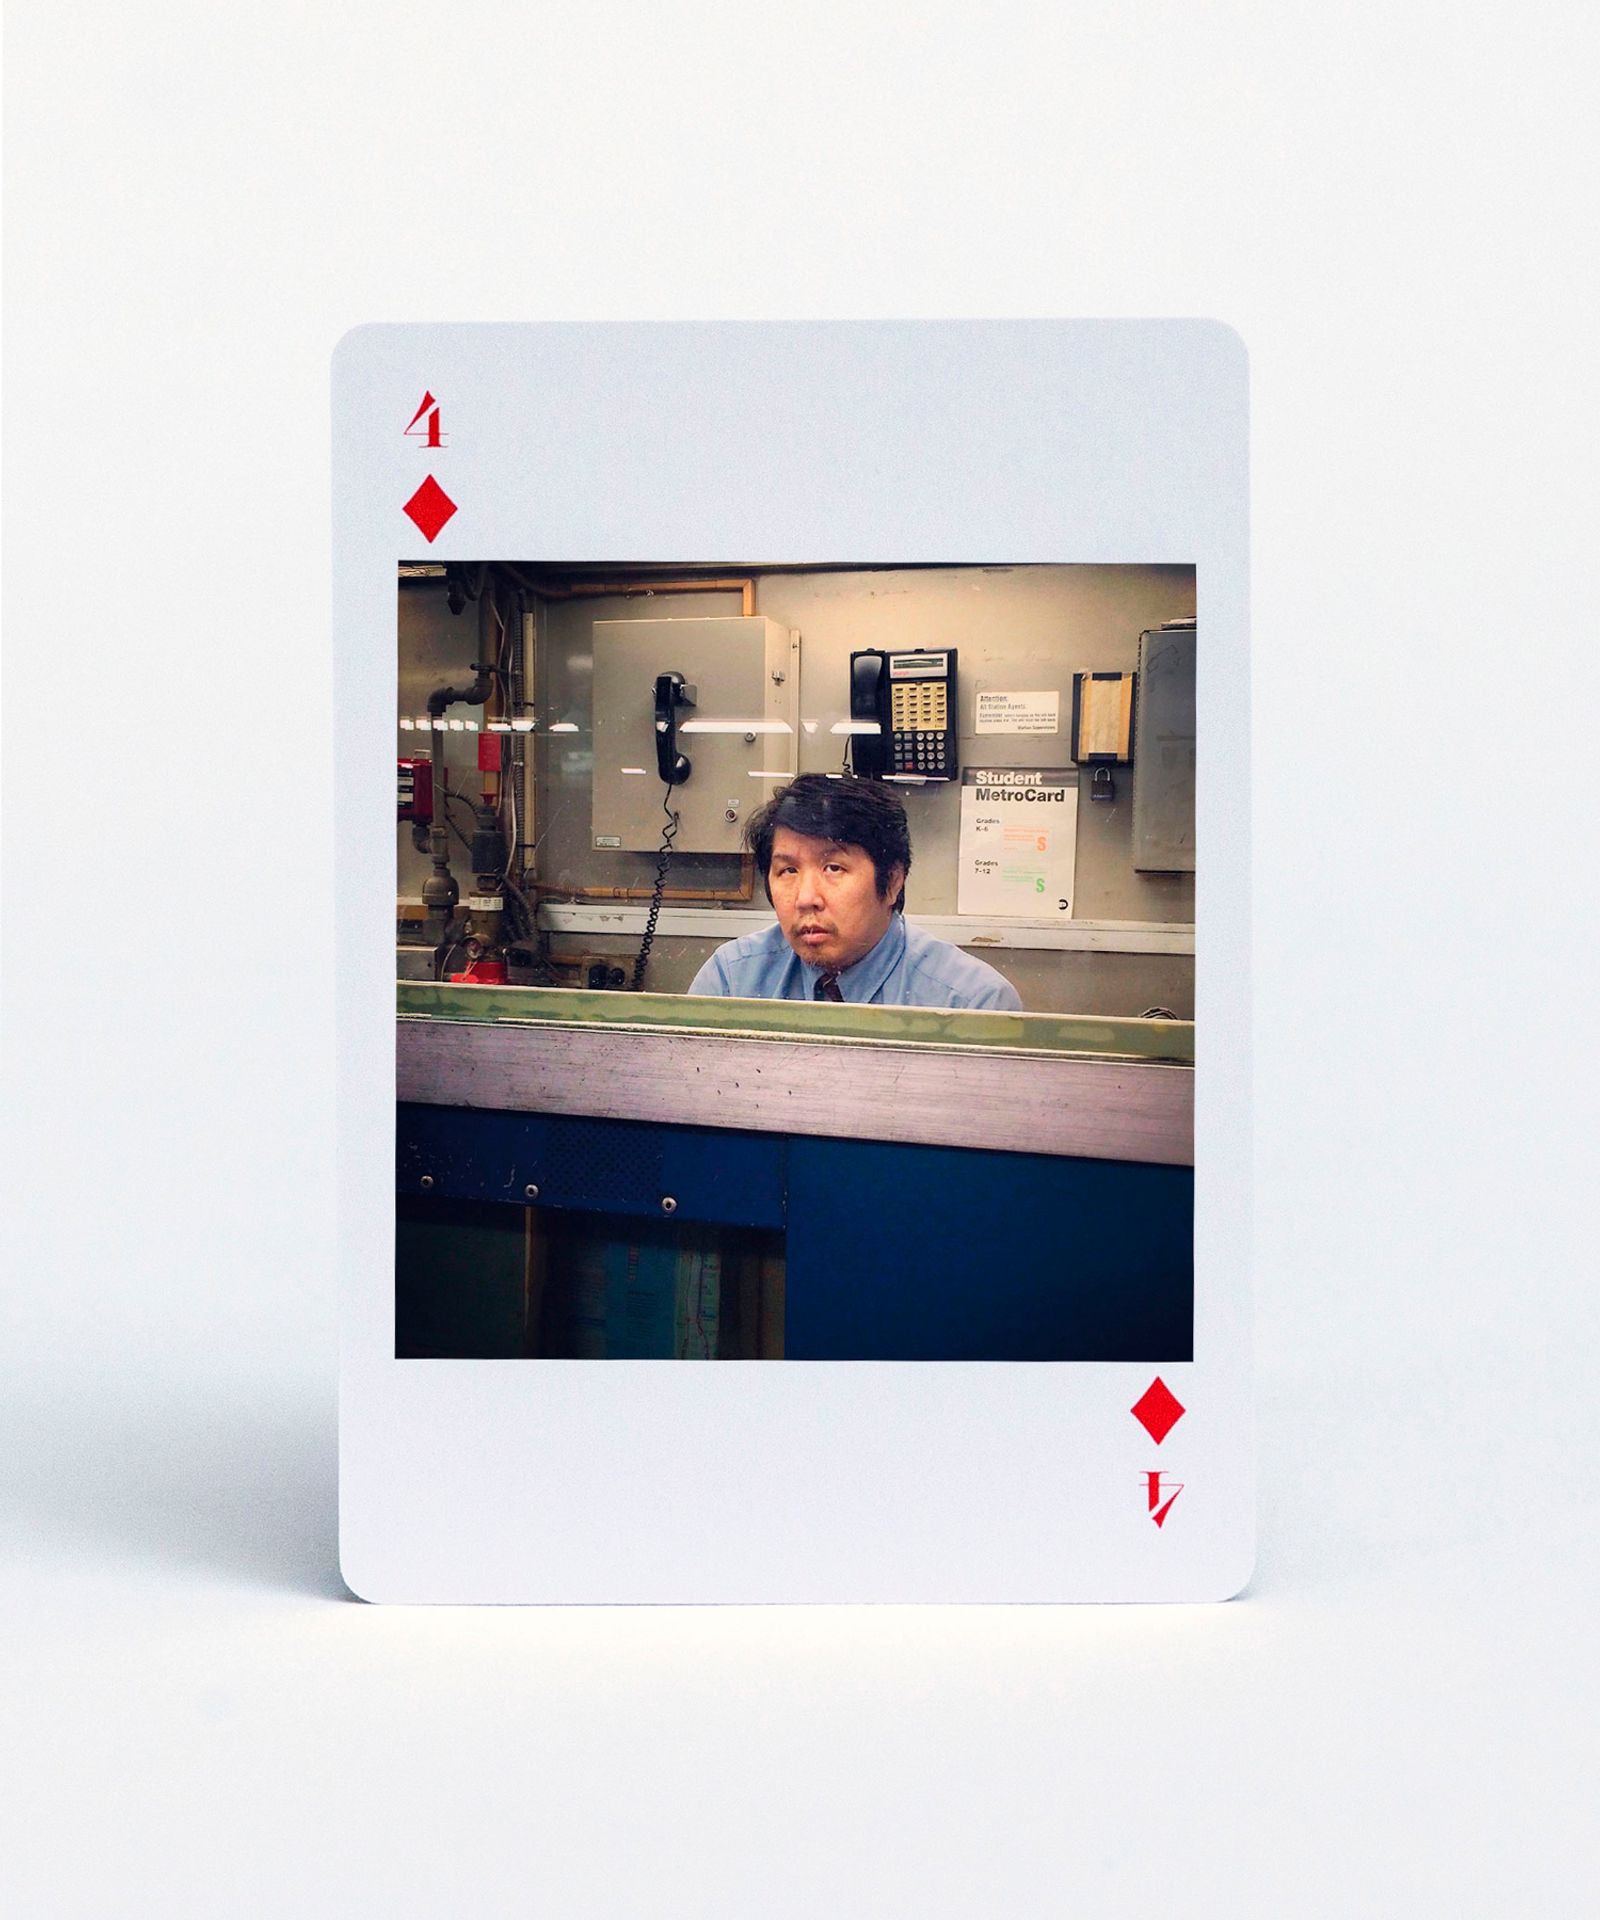 © Amy Touchette - Image from the New York City Street Dailies playing cards photography project